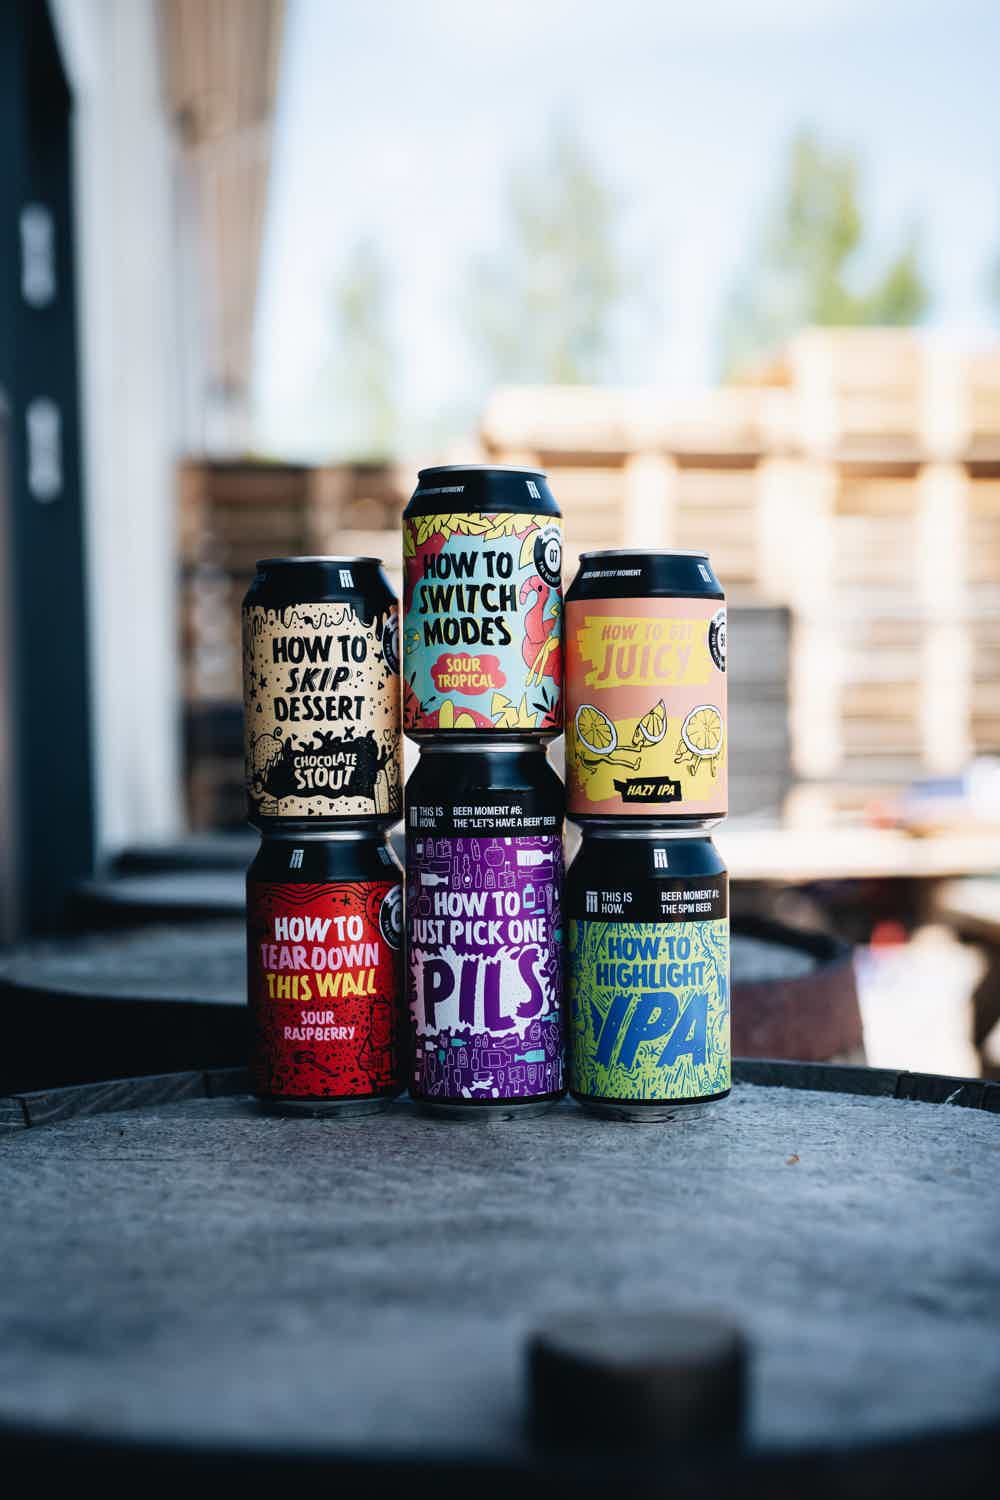 How to Keep it Simple - Bundle: How to switch modes - Sour Tropical, How to skip dessert, How to just pick one pils, How to highlight IPA, How to get juicy, How to teardown this wall - Sour raspberry